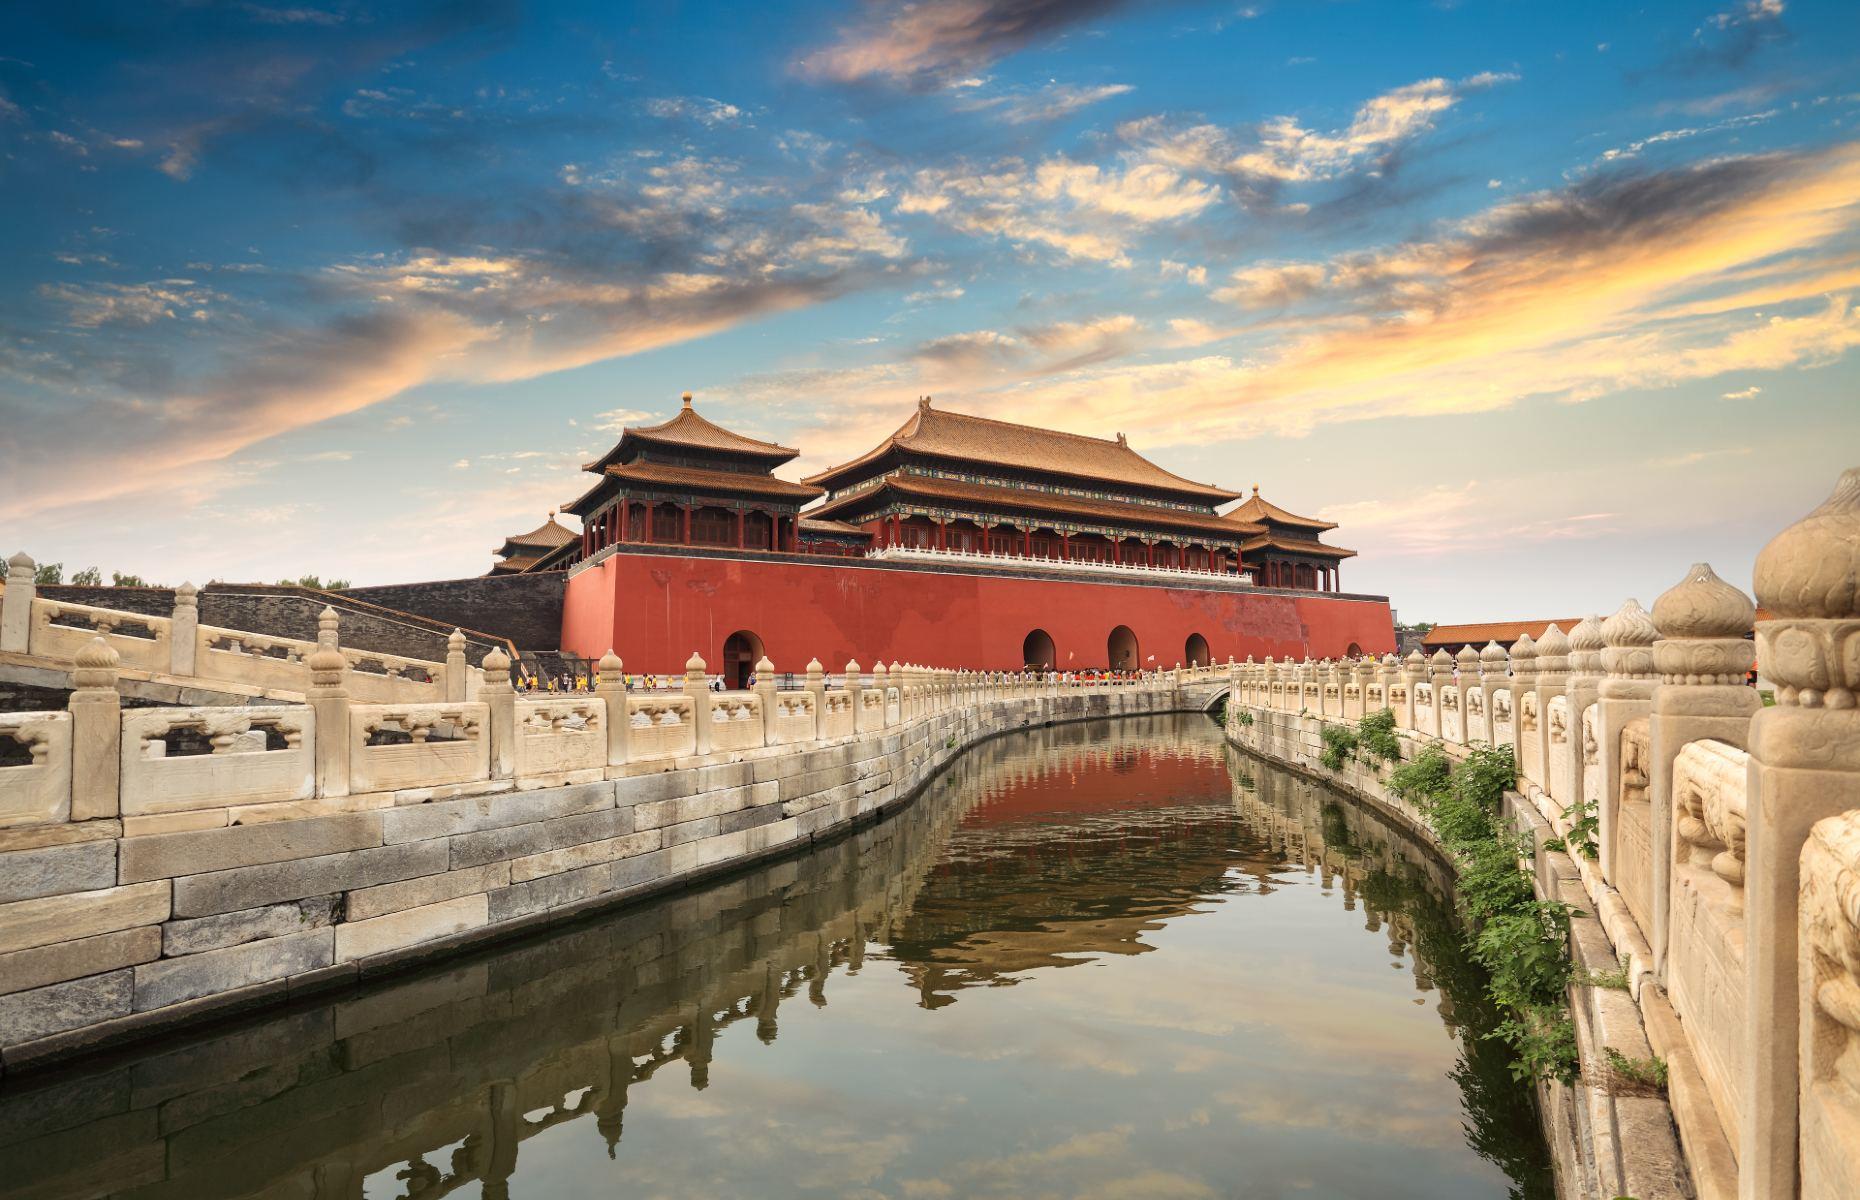 <p>Among the most popular attractions in China is the Forbidden City, Beijing’s former imperial palace. The 600-year-old World Heritage Site has been known to attract as many as 140,000 visitors daily in recent years, which spurred officials to impose a cap: since 2015, no more than 80,000 people can visit per day. The price will also be lowered during the low season, in the hope of attracting more tourists to visit while it’s quieter.</p>